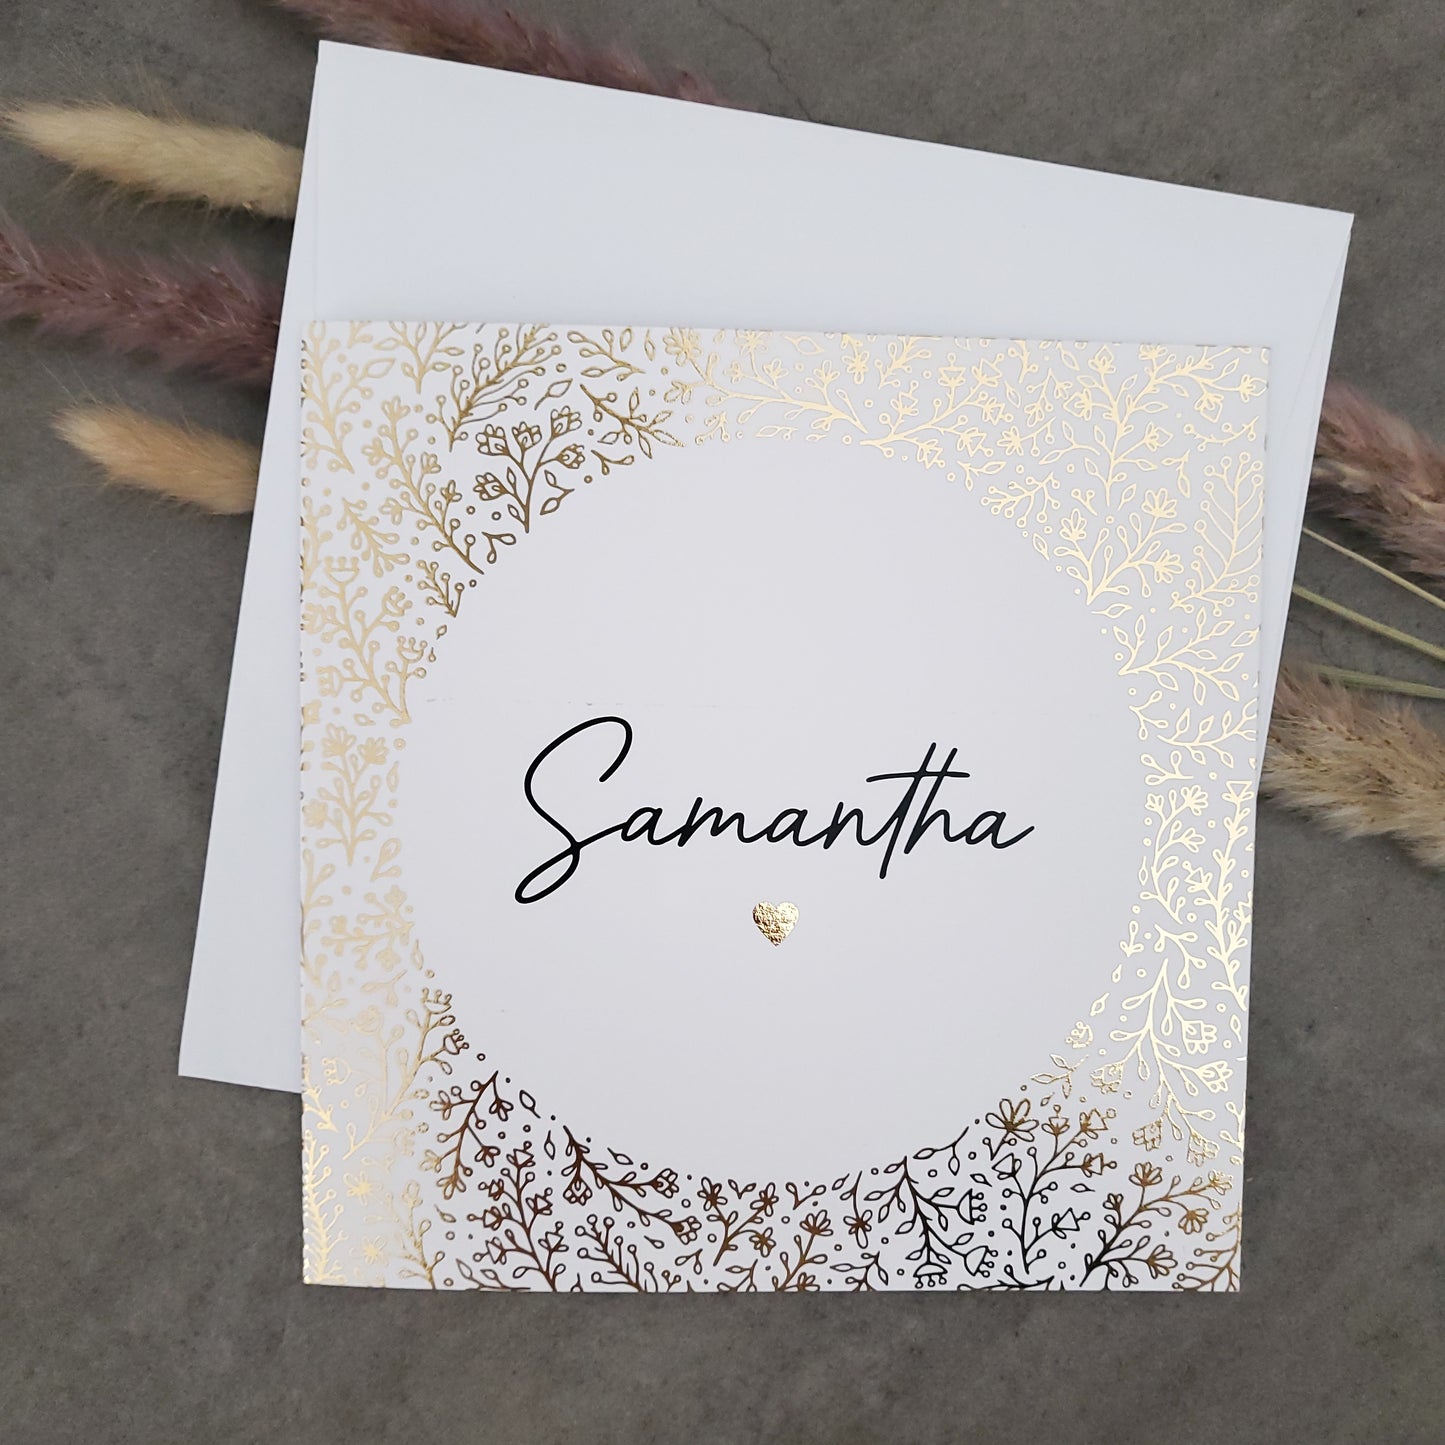 square white and gold bridesmaid proposal card personalized with a name - XOXOKristen